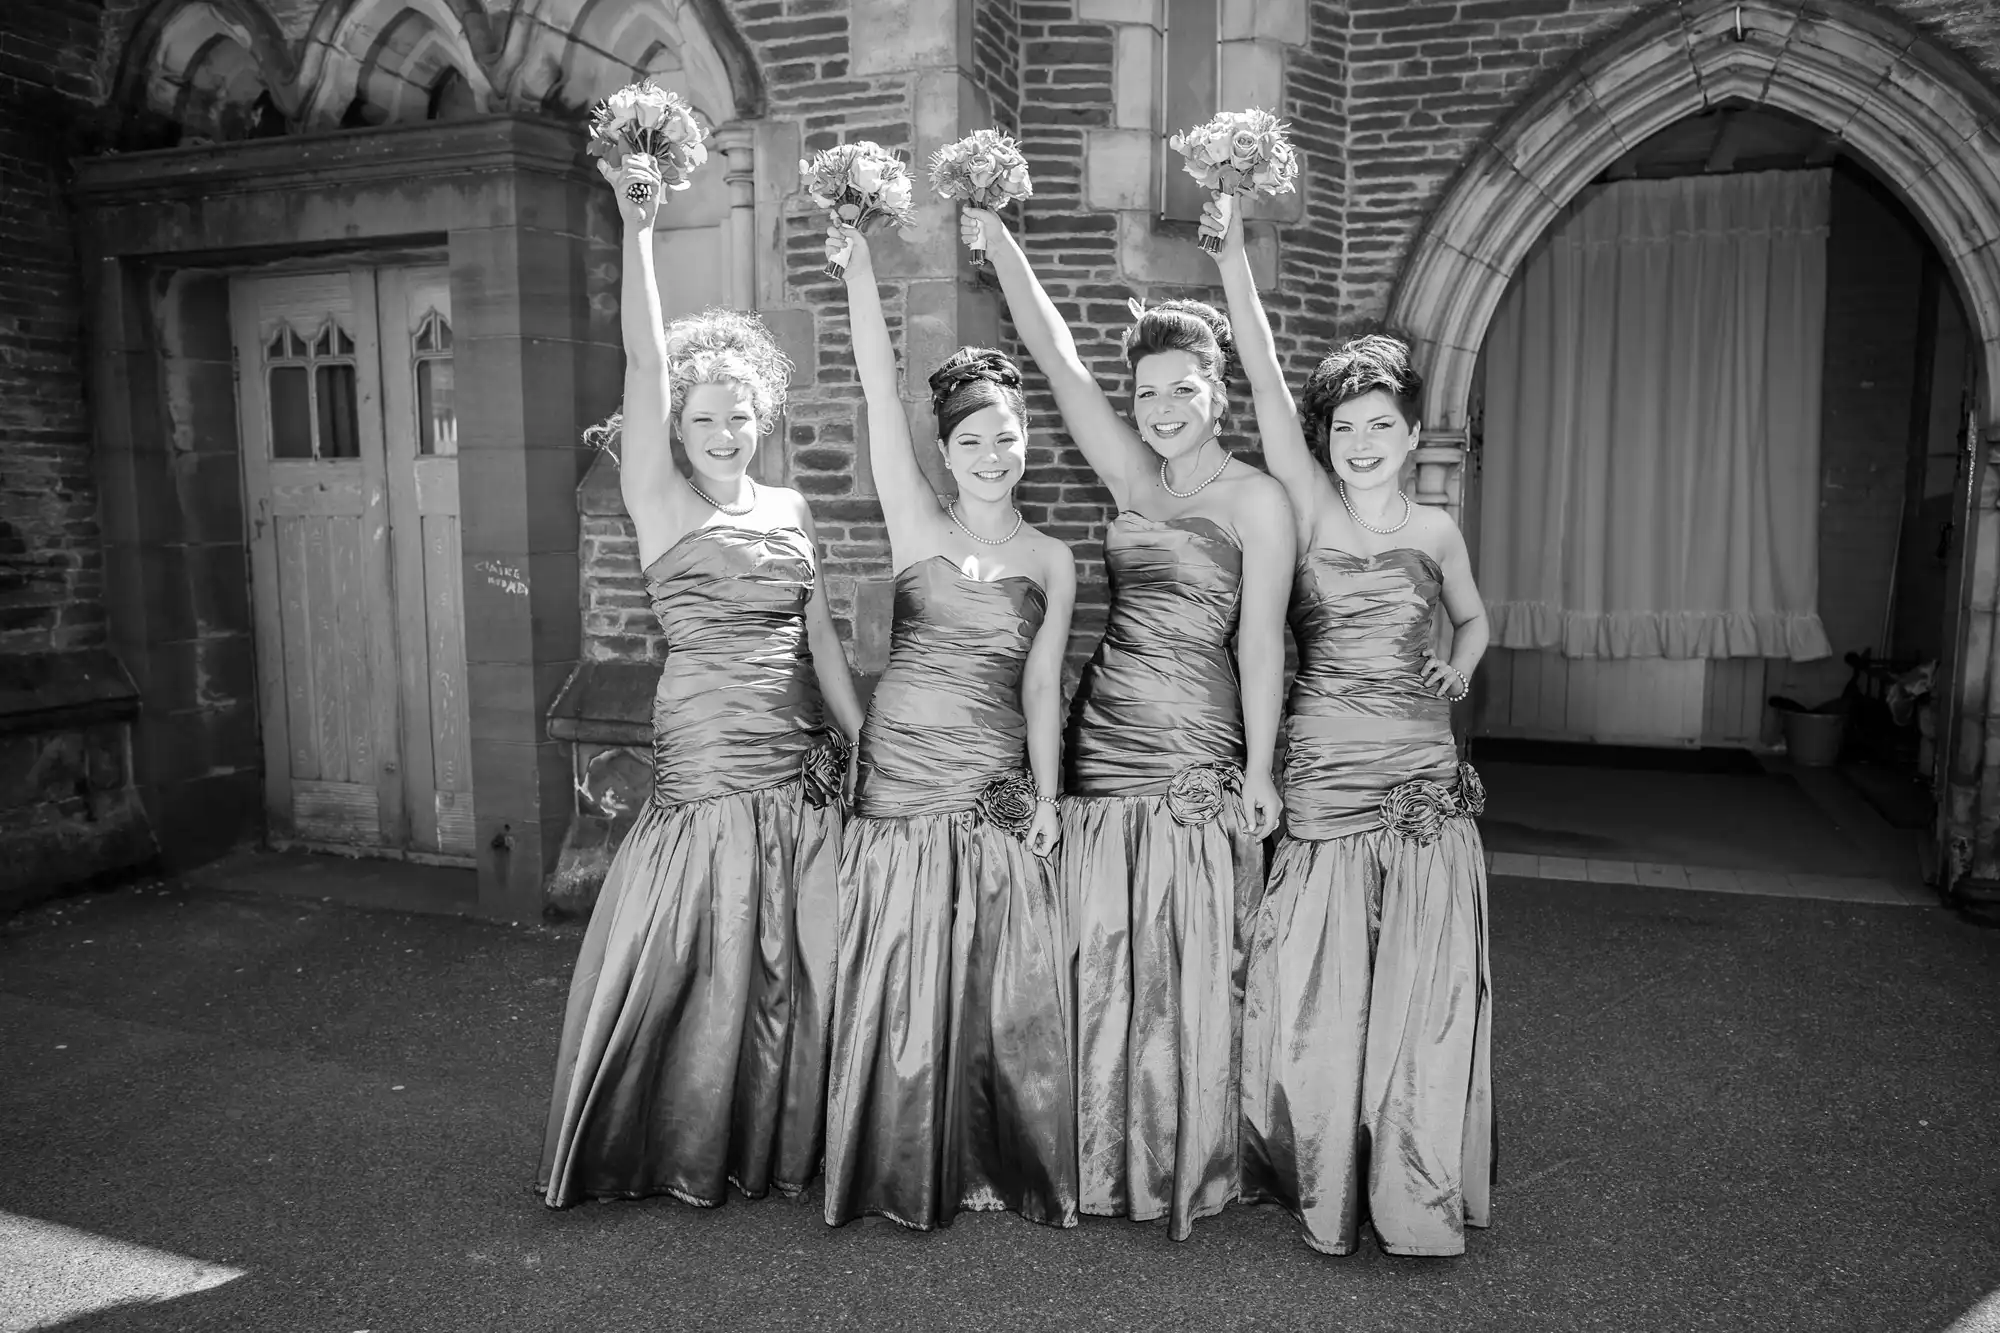 Four bridesmaids in matching dresses holding bouquets pose joyfully outside a church entrance.